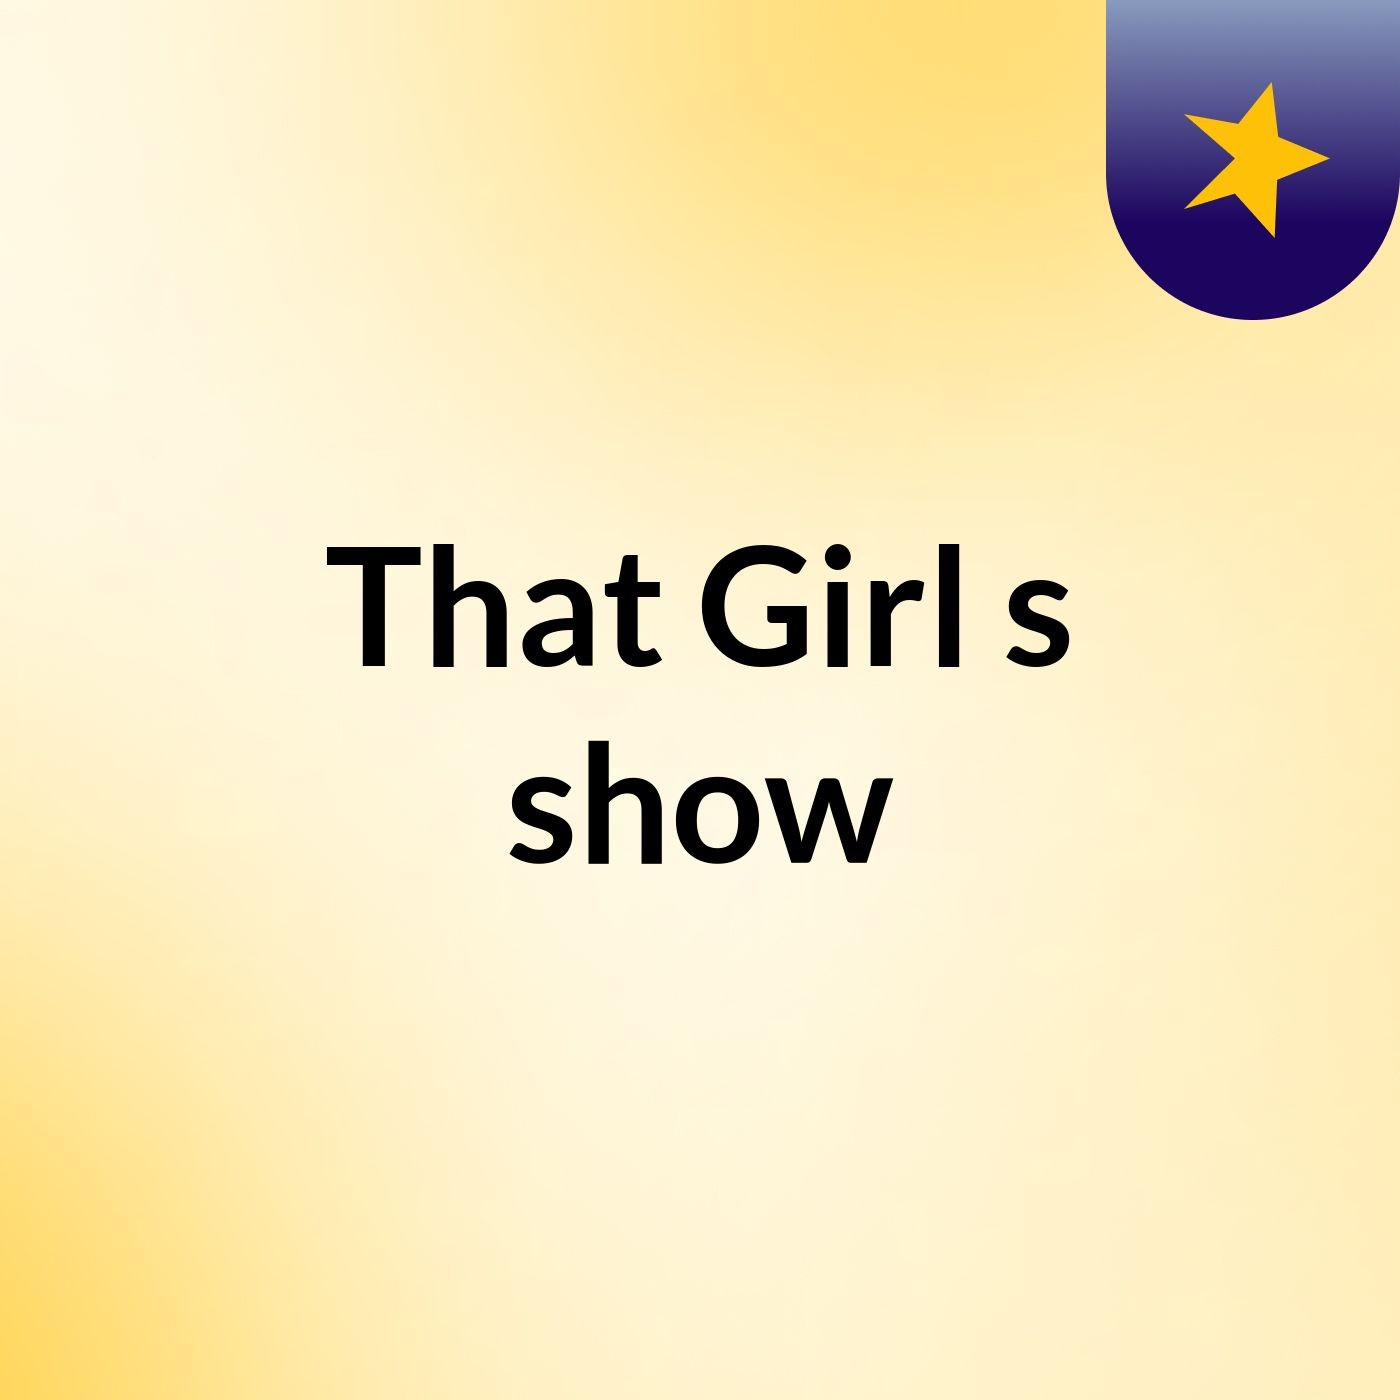 That Girl's show